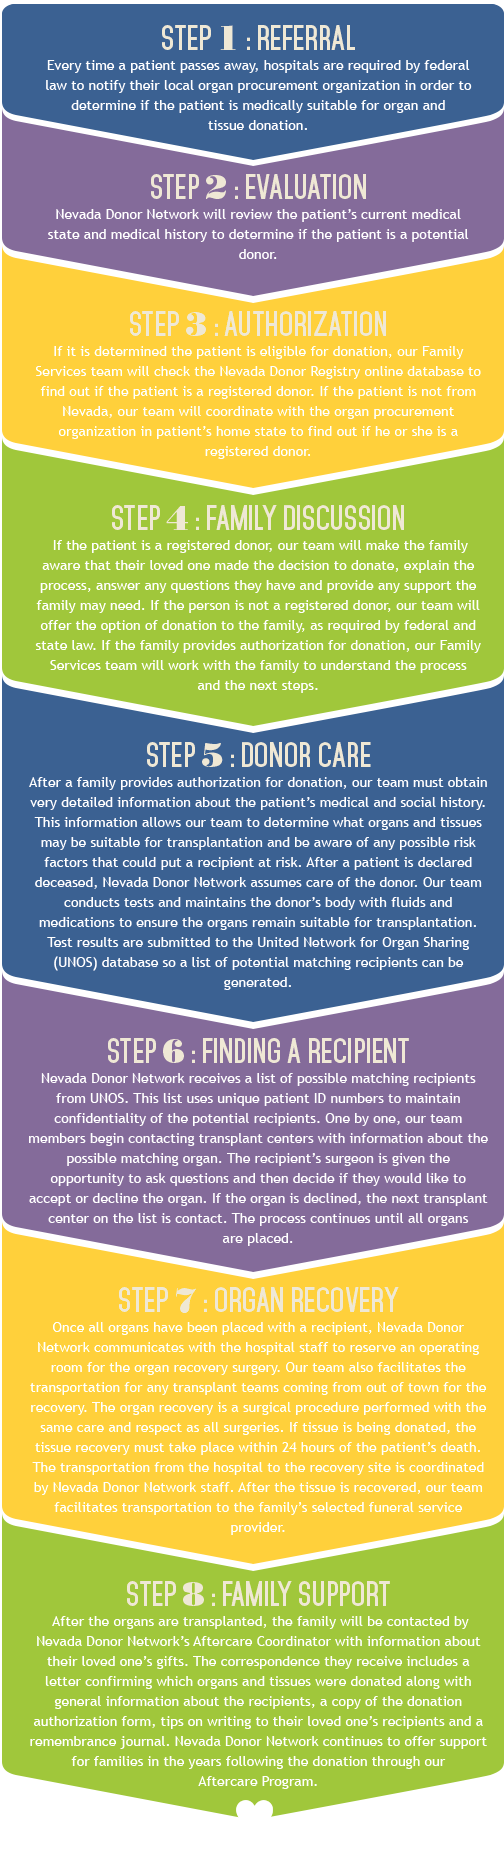 The Donation Process